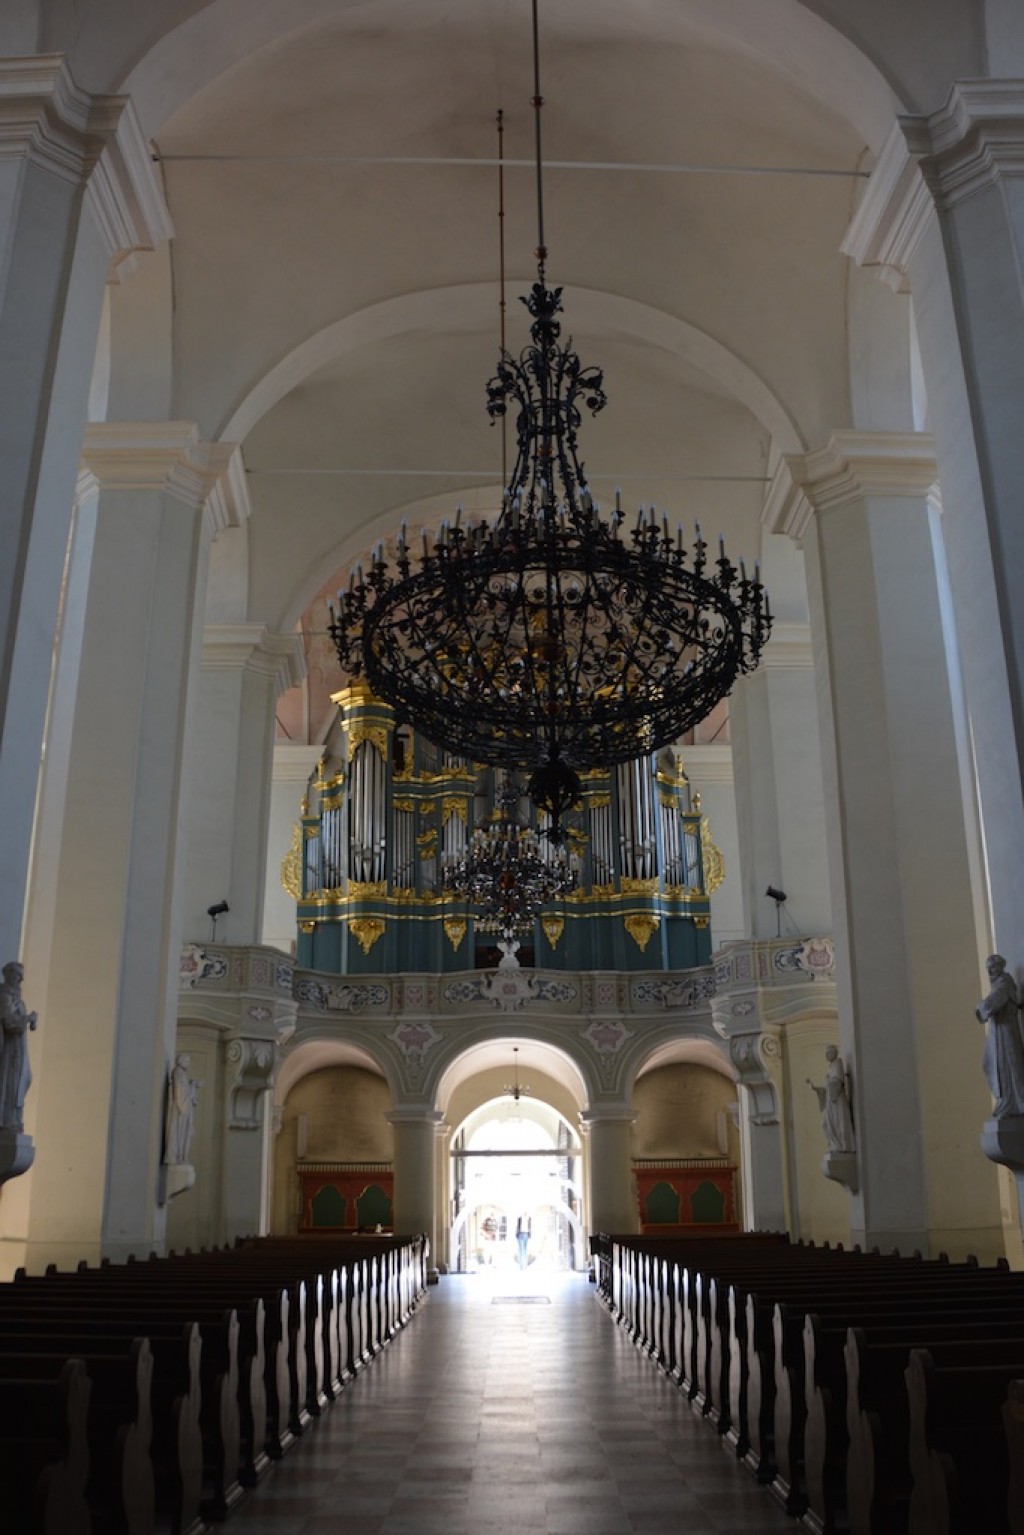 Touring Vilnius in a day was a lot more challenging than we thought it would be! There's a lot to see, between the churches, the museum, and the towers we were kept pretty busy.